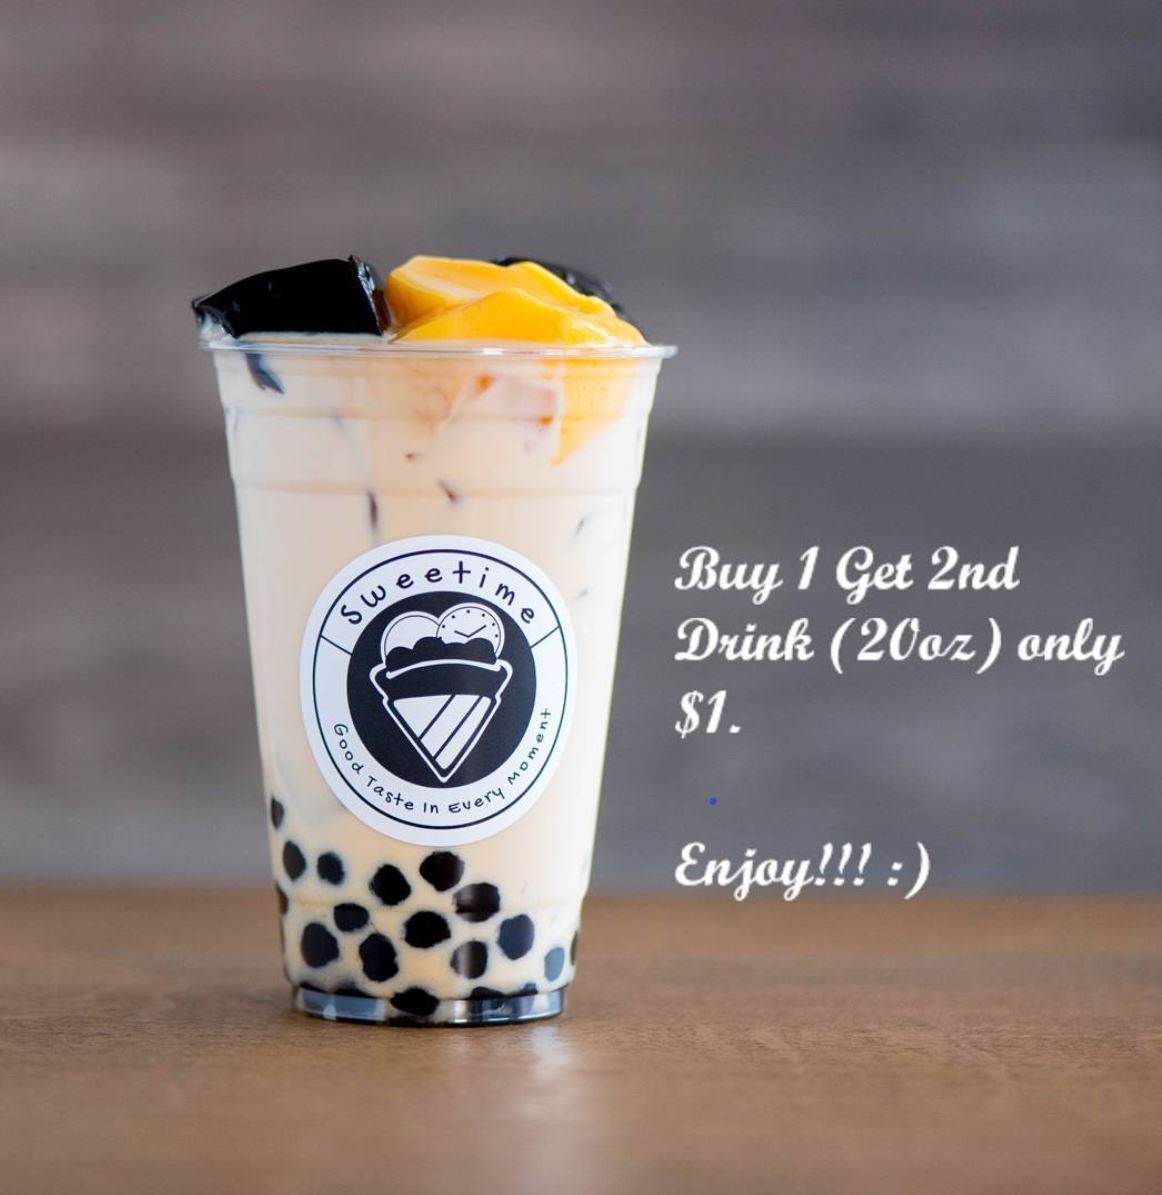 All February | Buy Any Drink and Get 2nd Drink for Just $1 @ Sweetime - Garden Grove